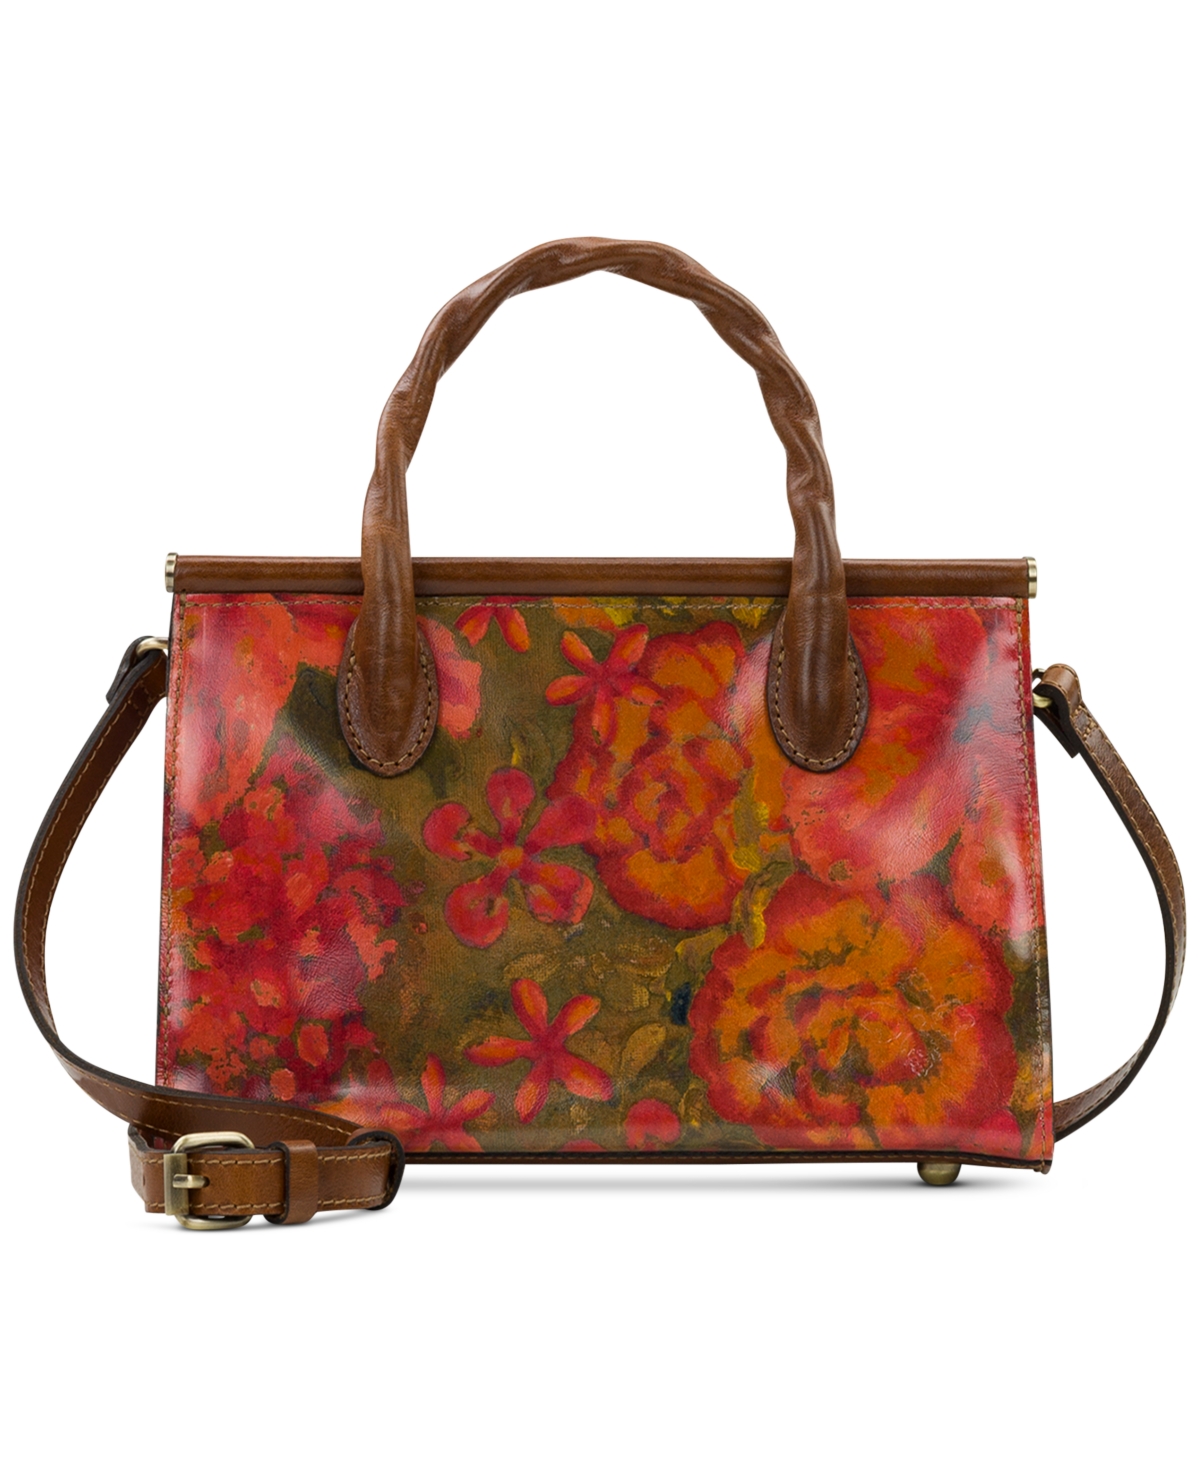 Patricia Nash Clarisse Small Leather Satchel Crossbody In Floral Oil